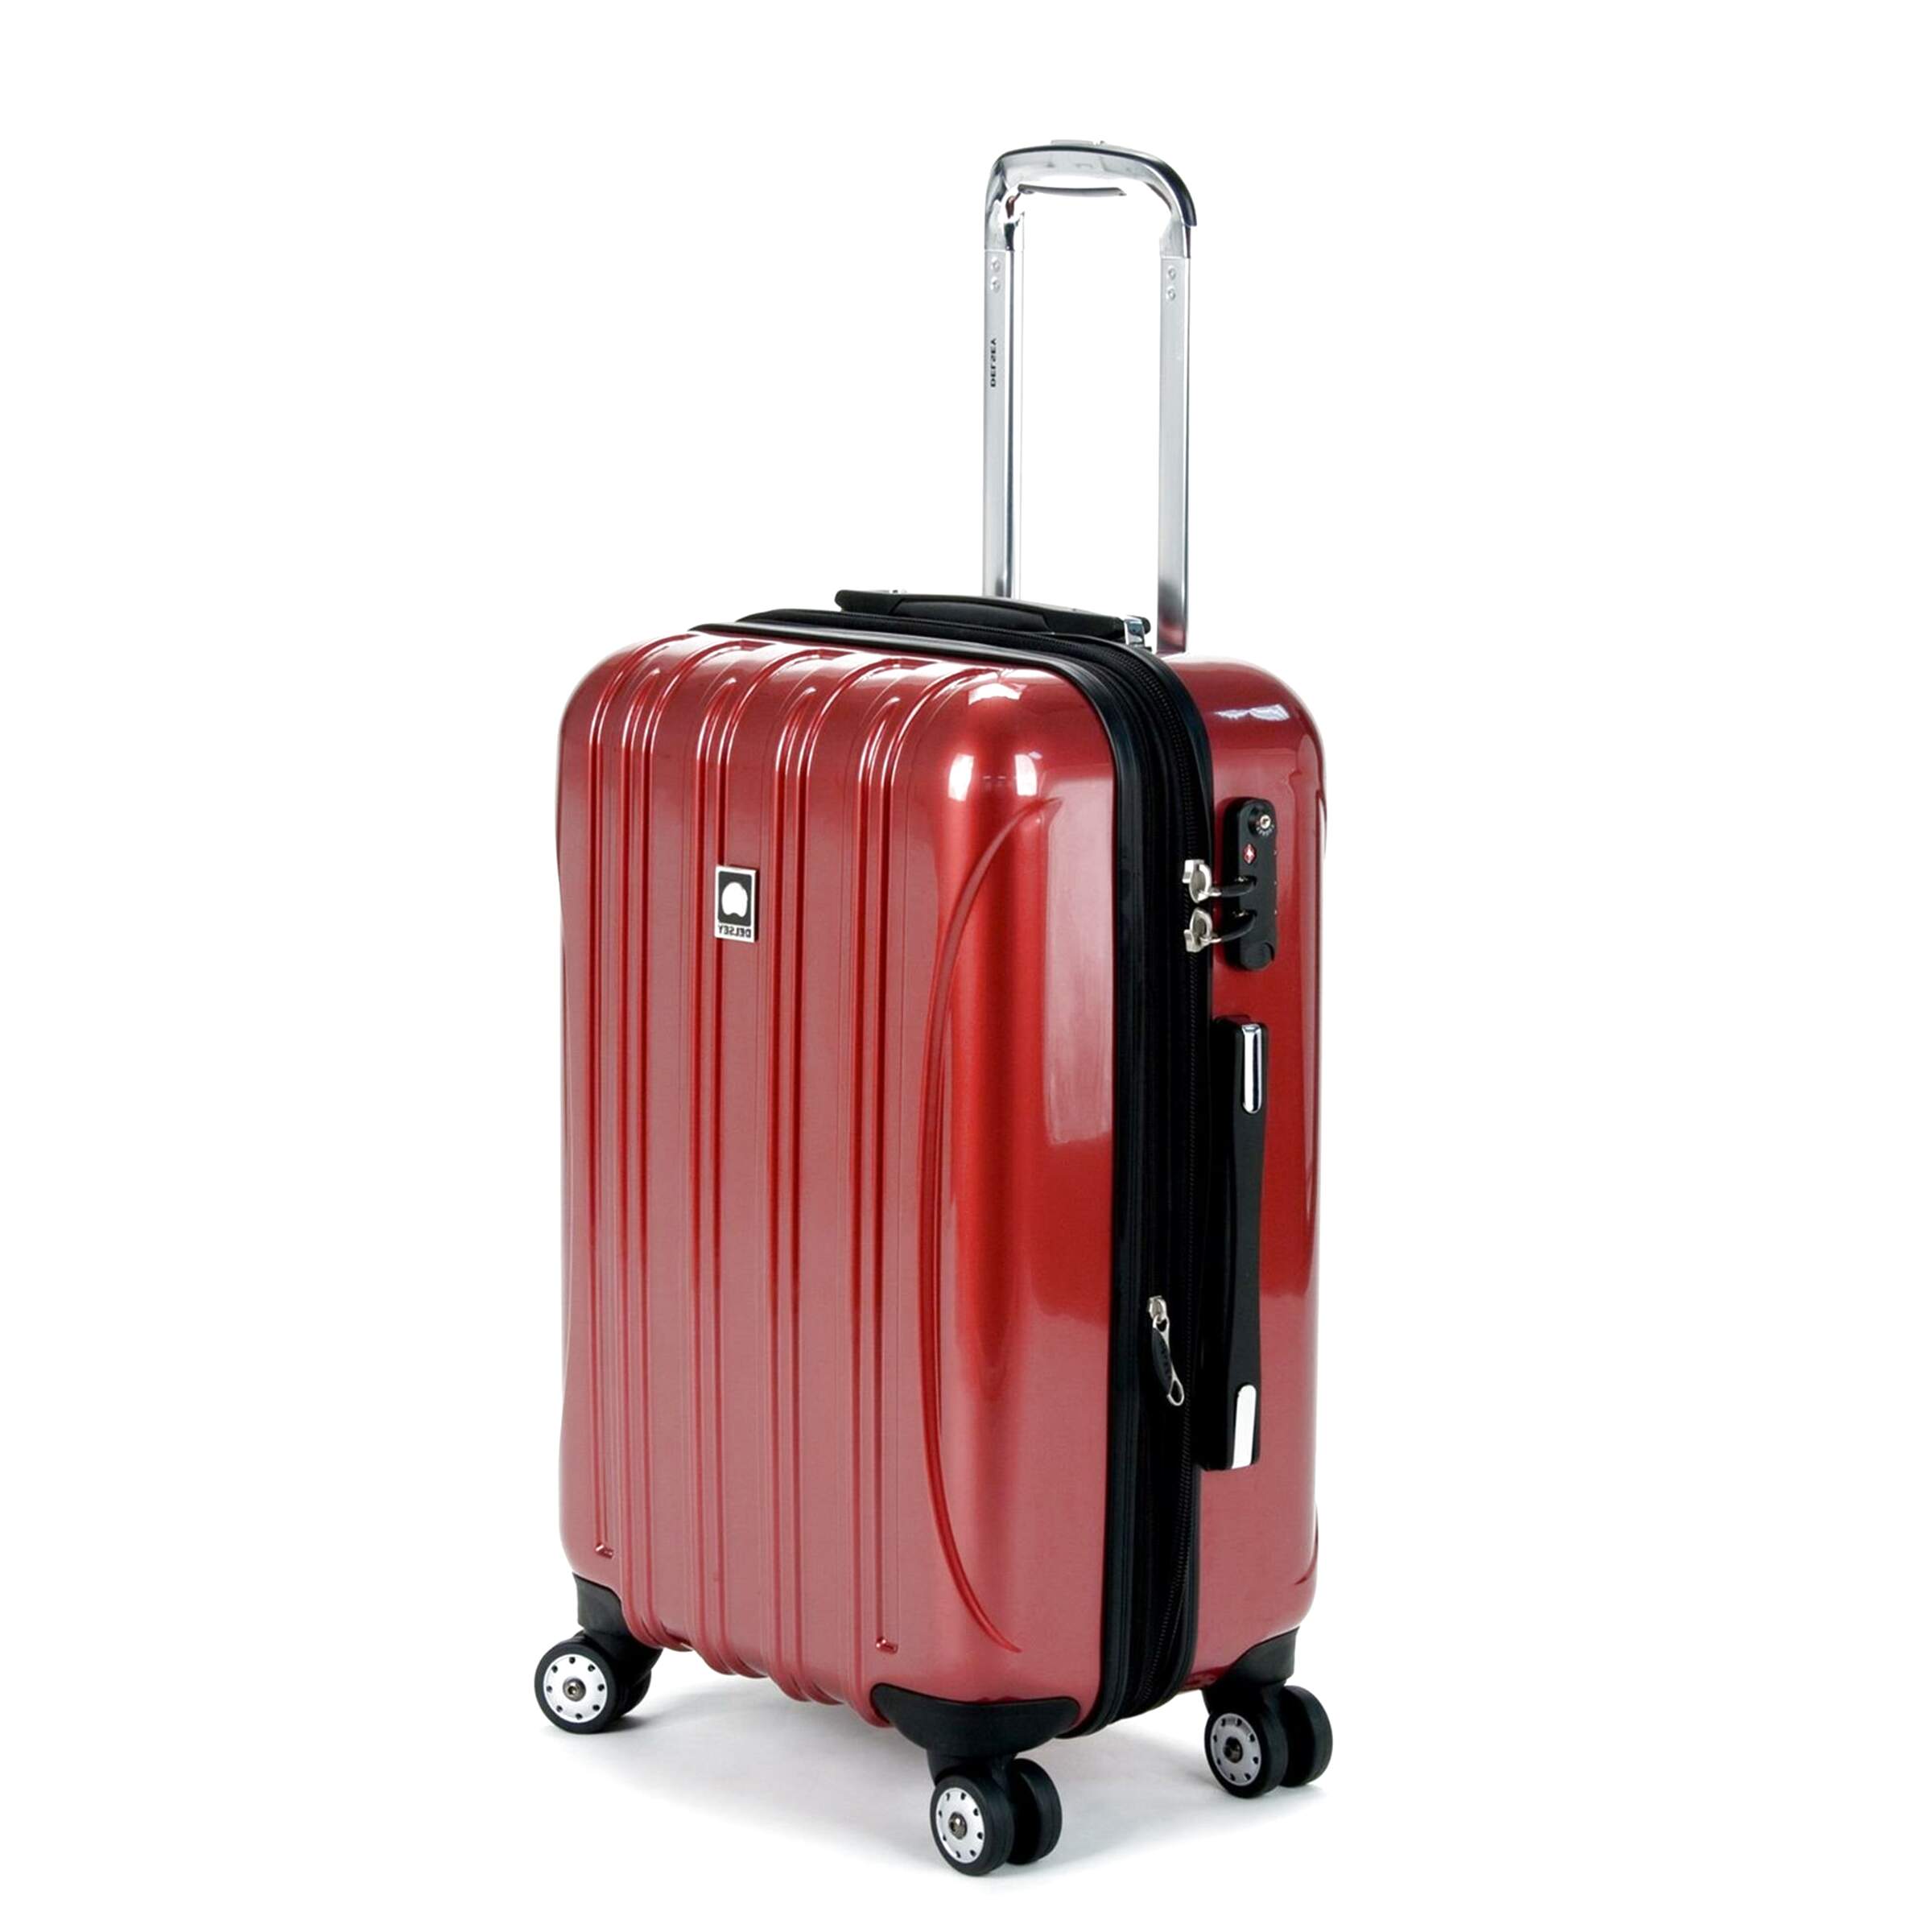 Delsey Luggage for sale in UK | 48 used Delsey Luggages